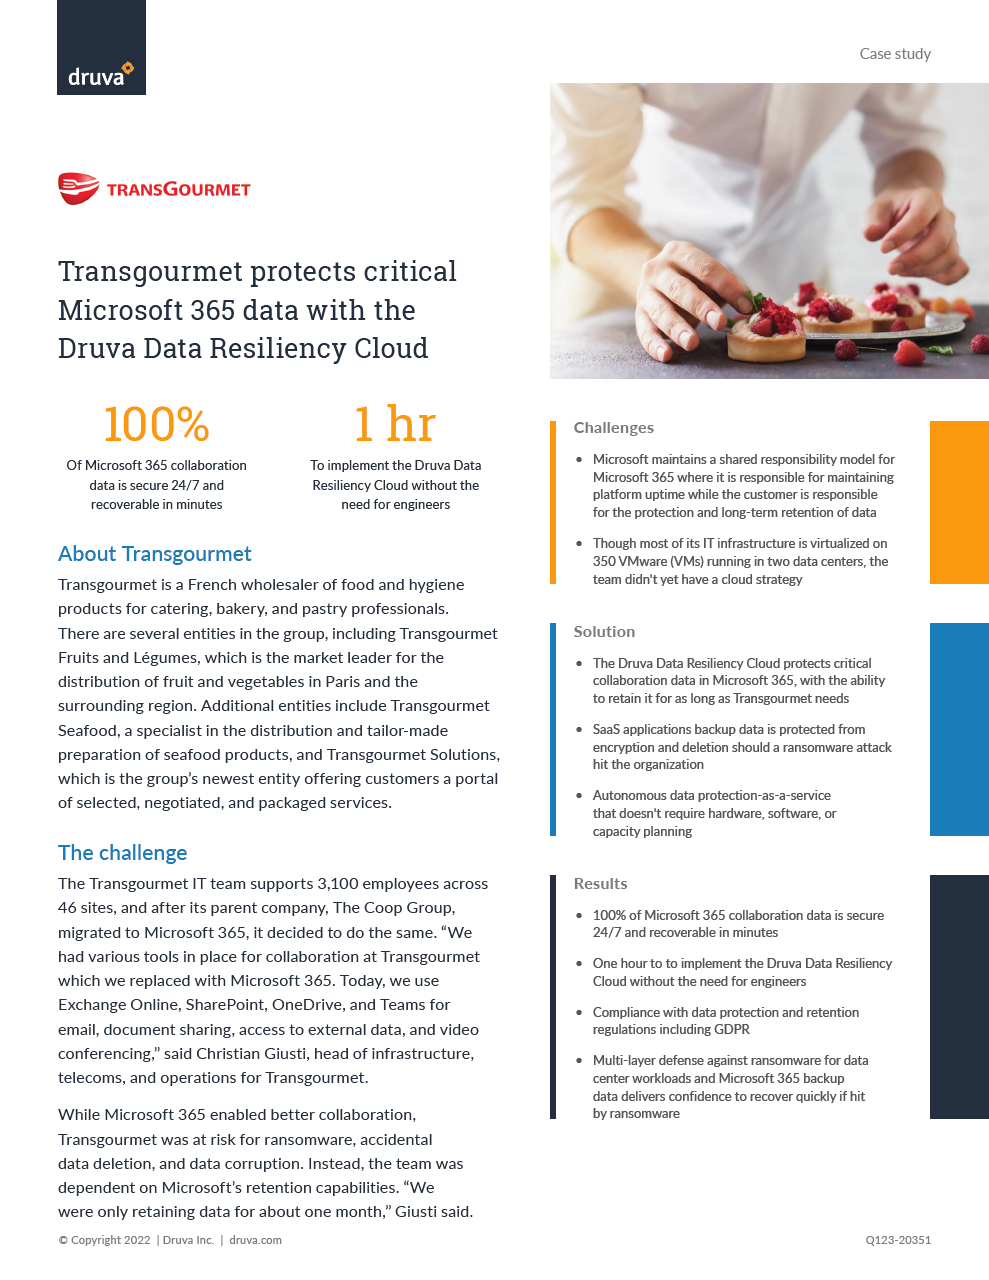 Transgourmet protects critical Microsoft 365 data with the Druva Data Resiliency Cloud